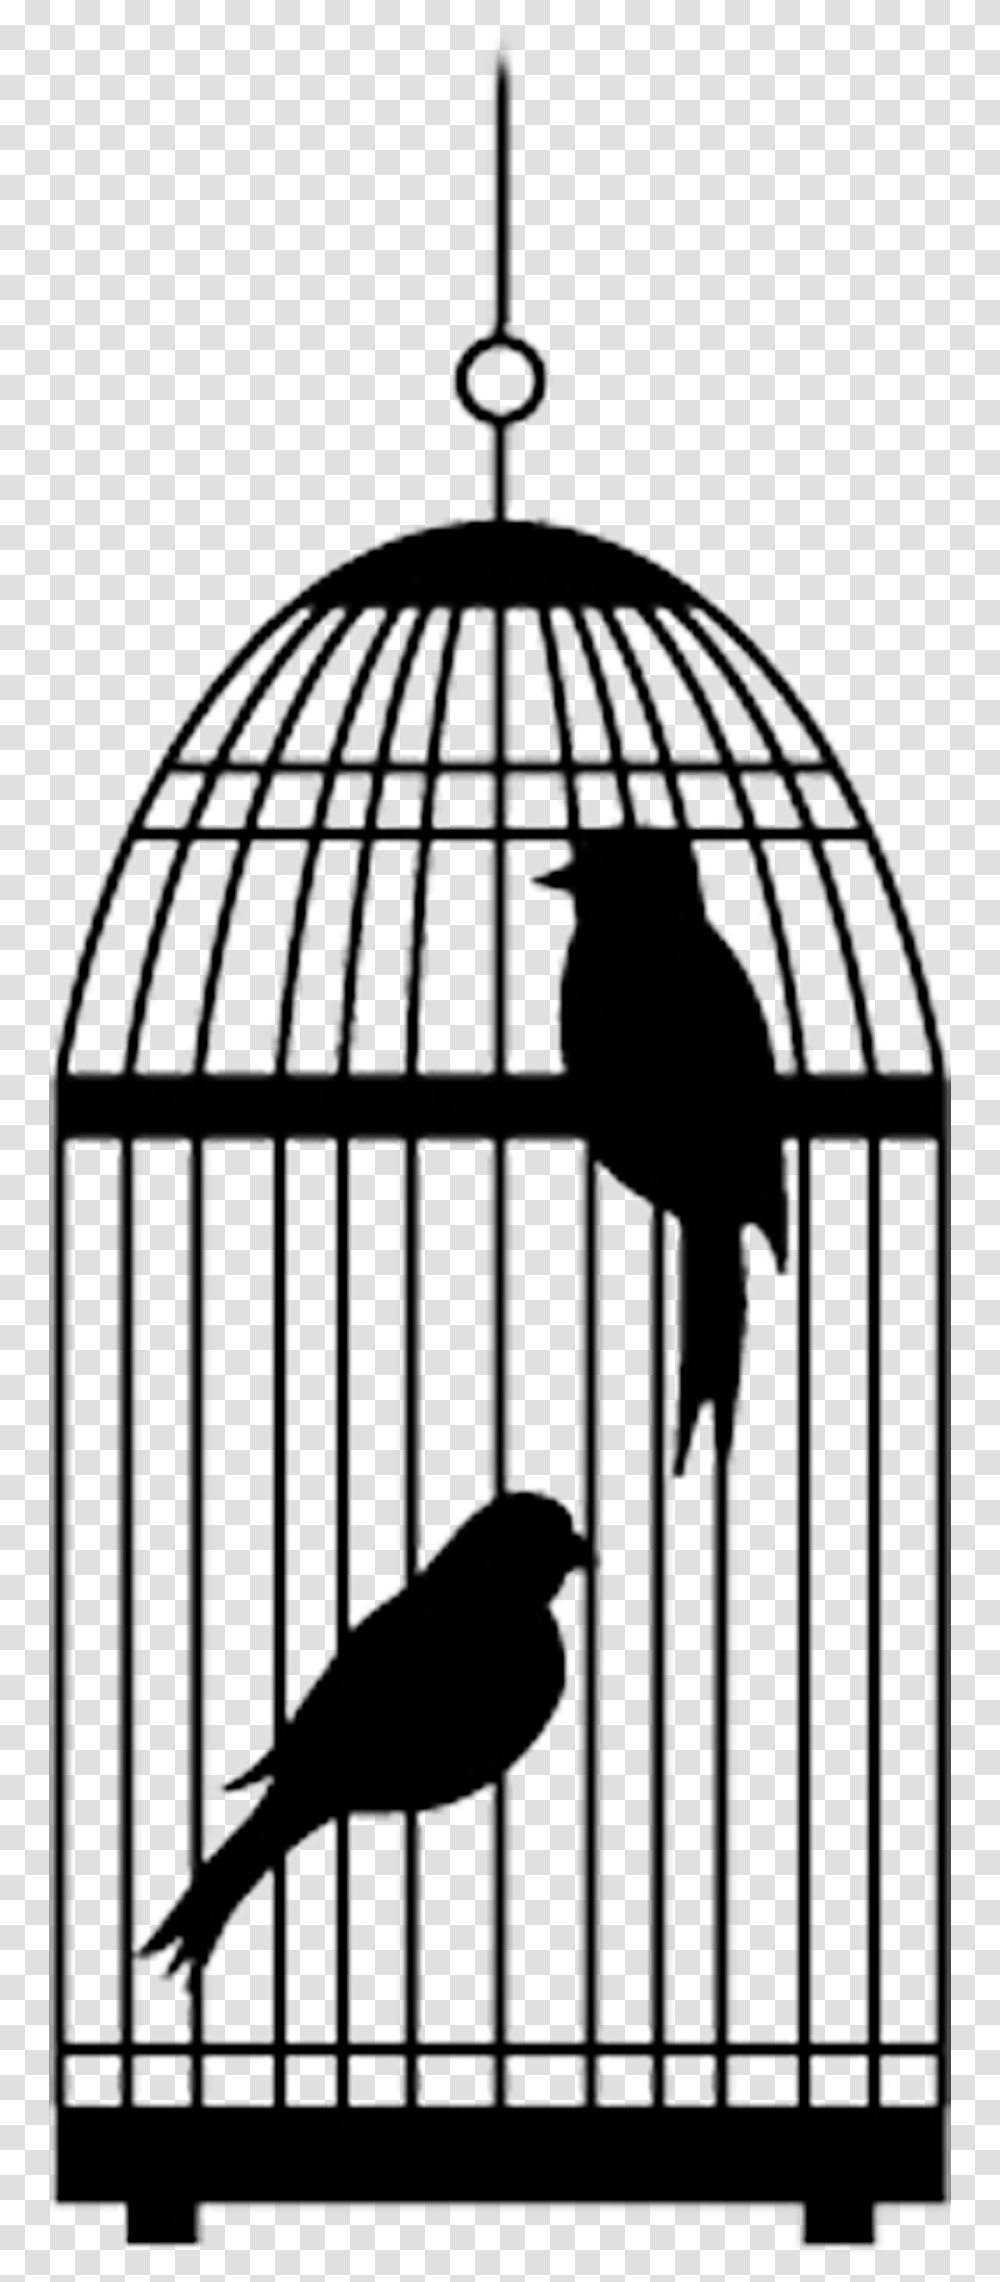 Bird Cage With Two Birds Cartoons Cage Clipart Bird In A Cage Background, Gate, Prison, Grille, Silhouette Transparent Png